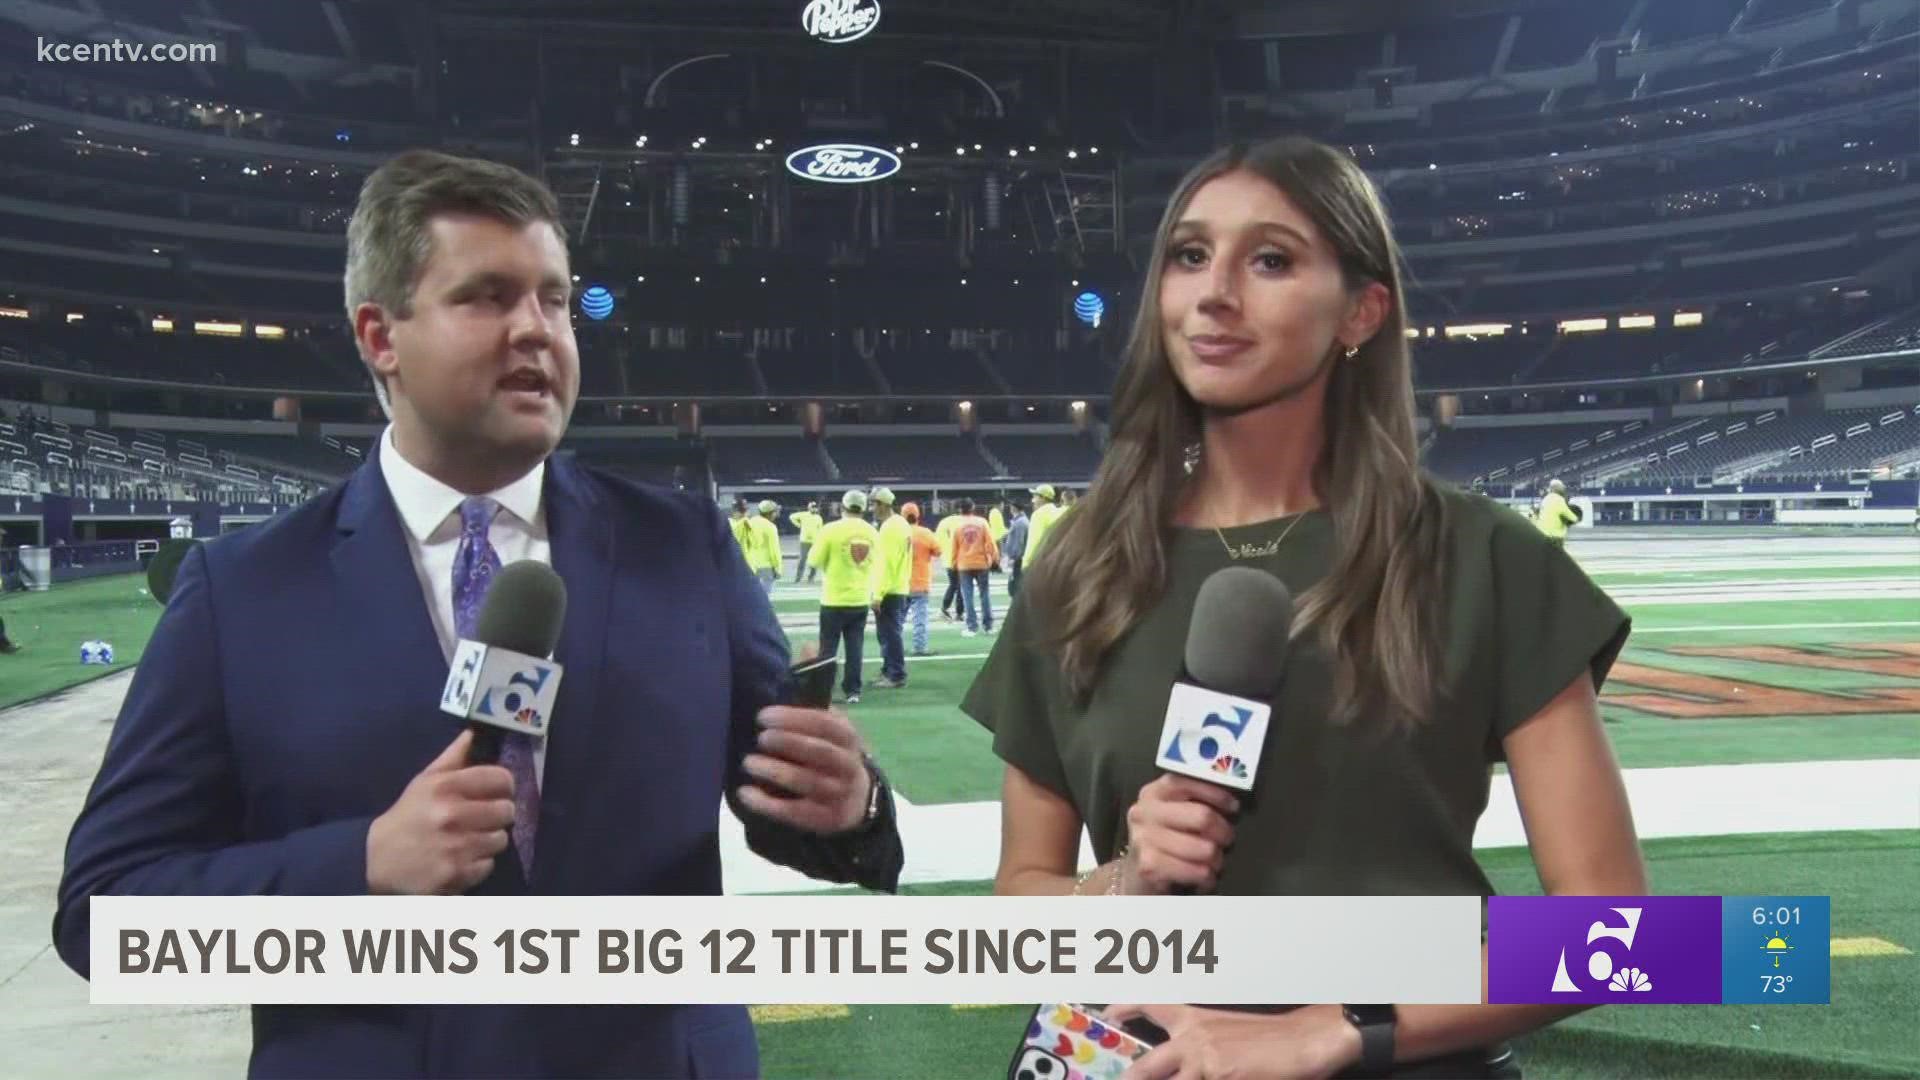 Shapen broke a Big12 Title Game record as well as an AT&T Stadium record